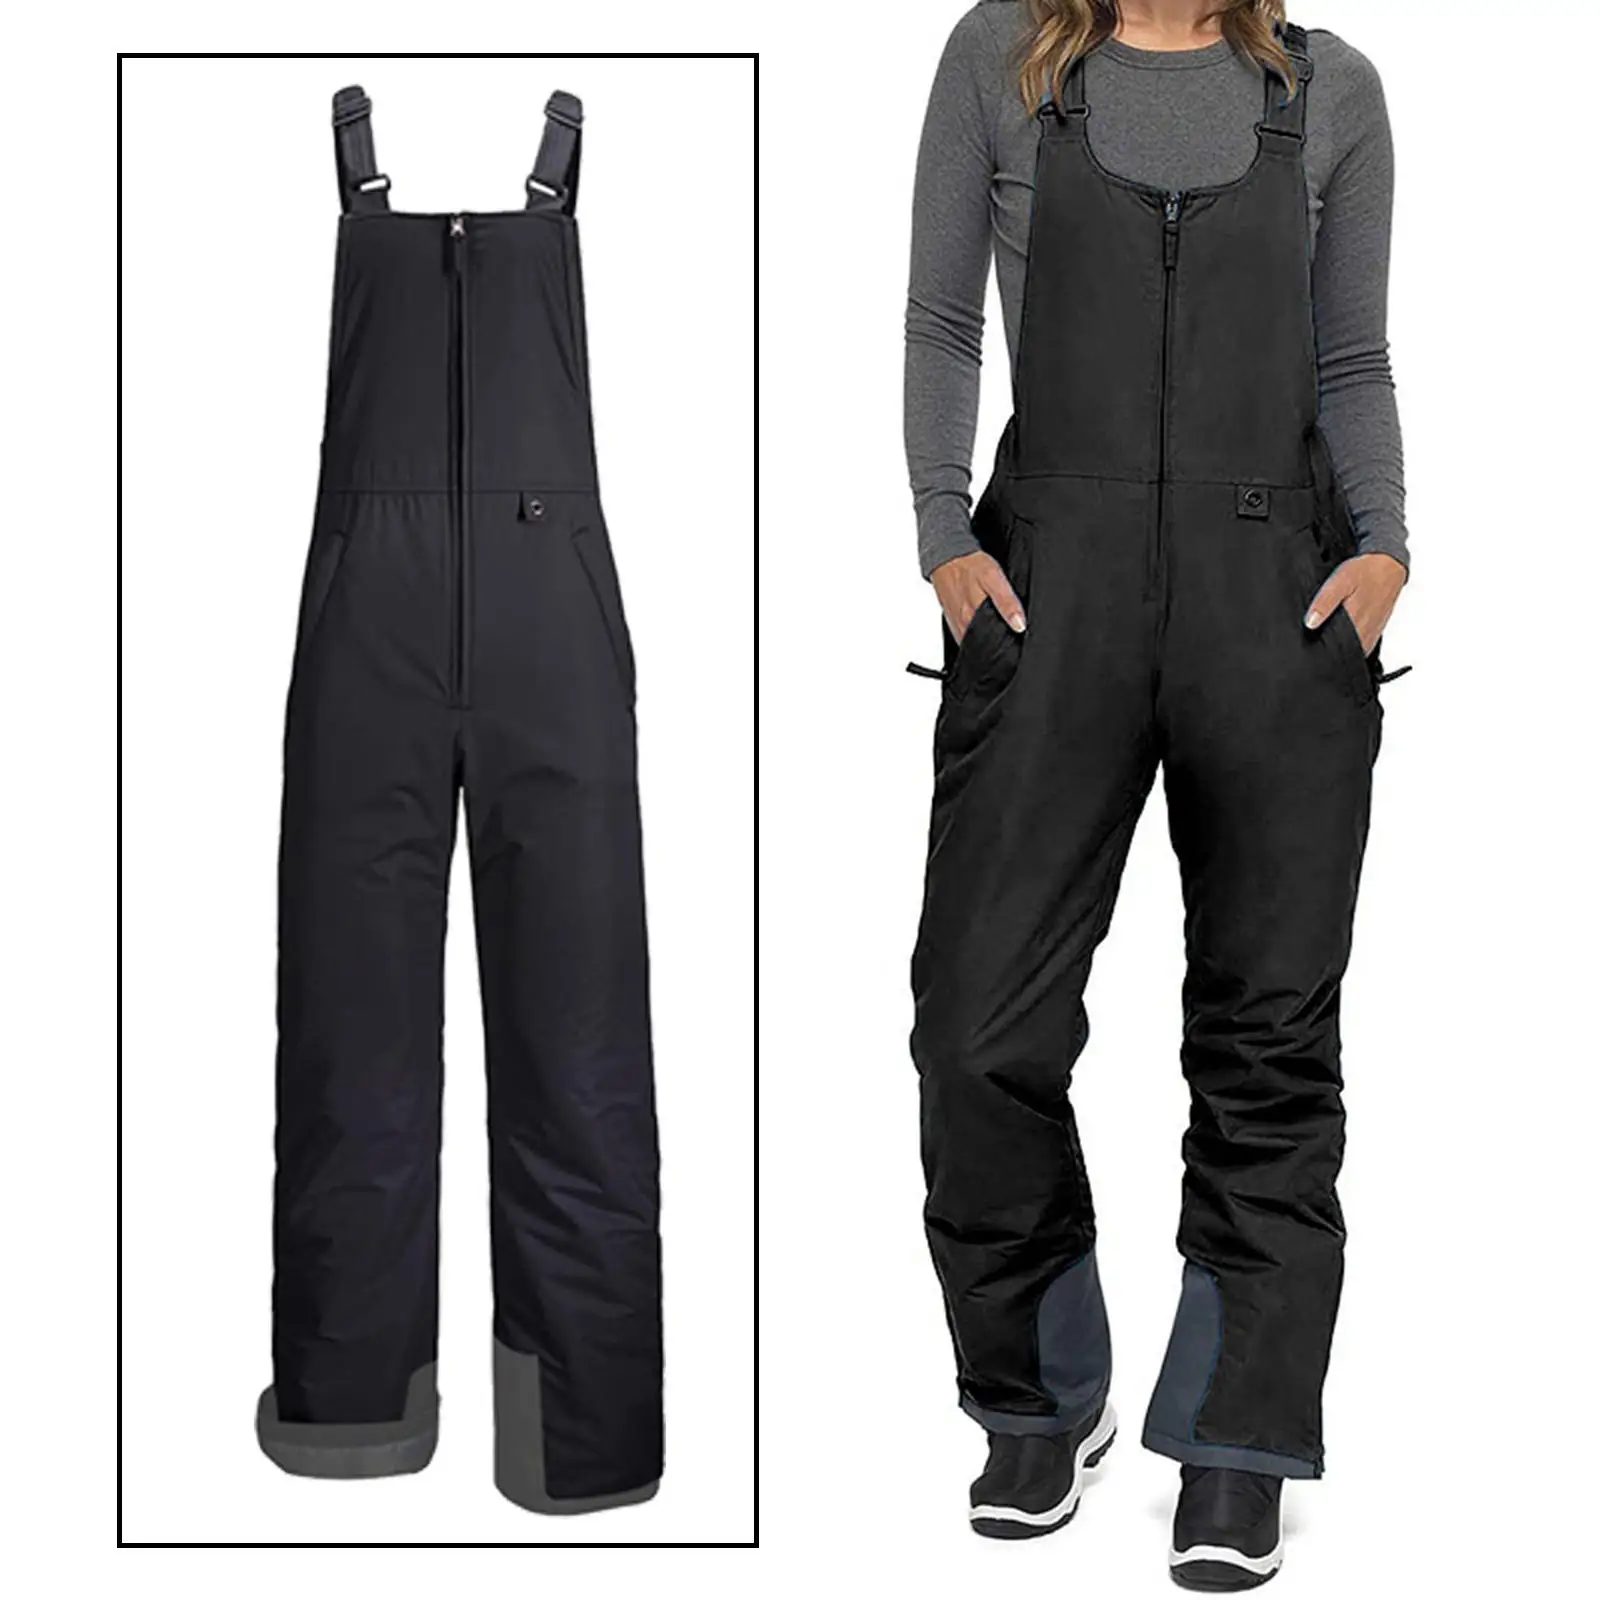 Ski Bib Windproof Insulated Ripstop Snow Pants Sled Skiing Pants for Women